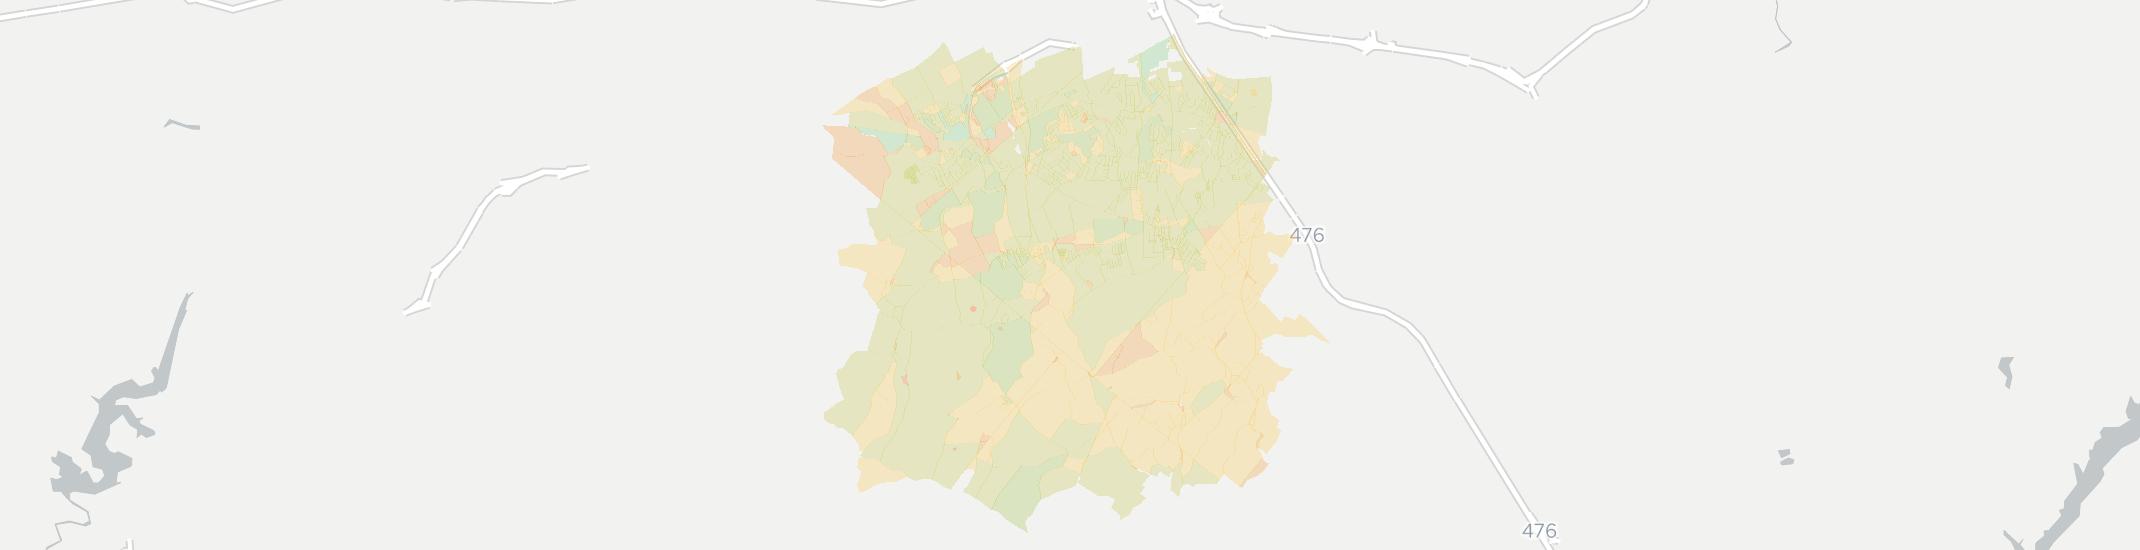 Macungie Internet Competition Map. Click for interactive map.